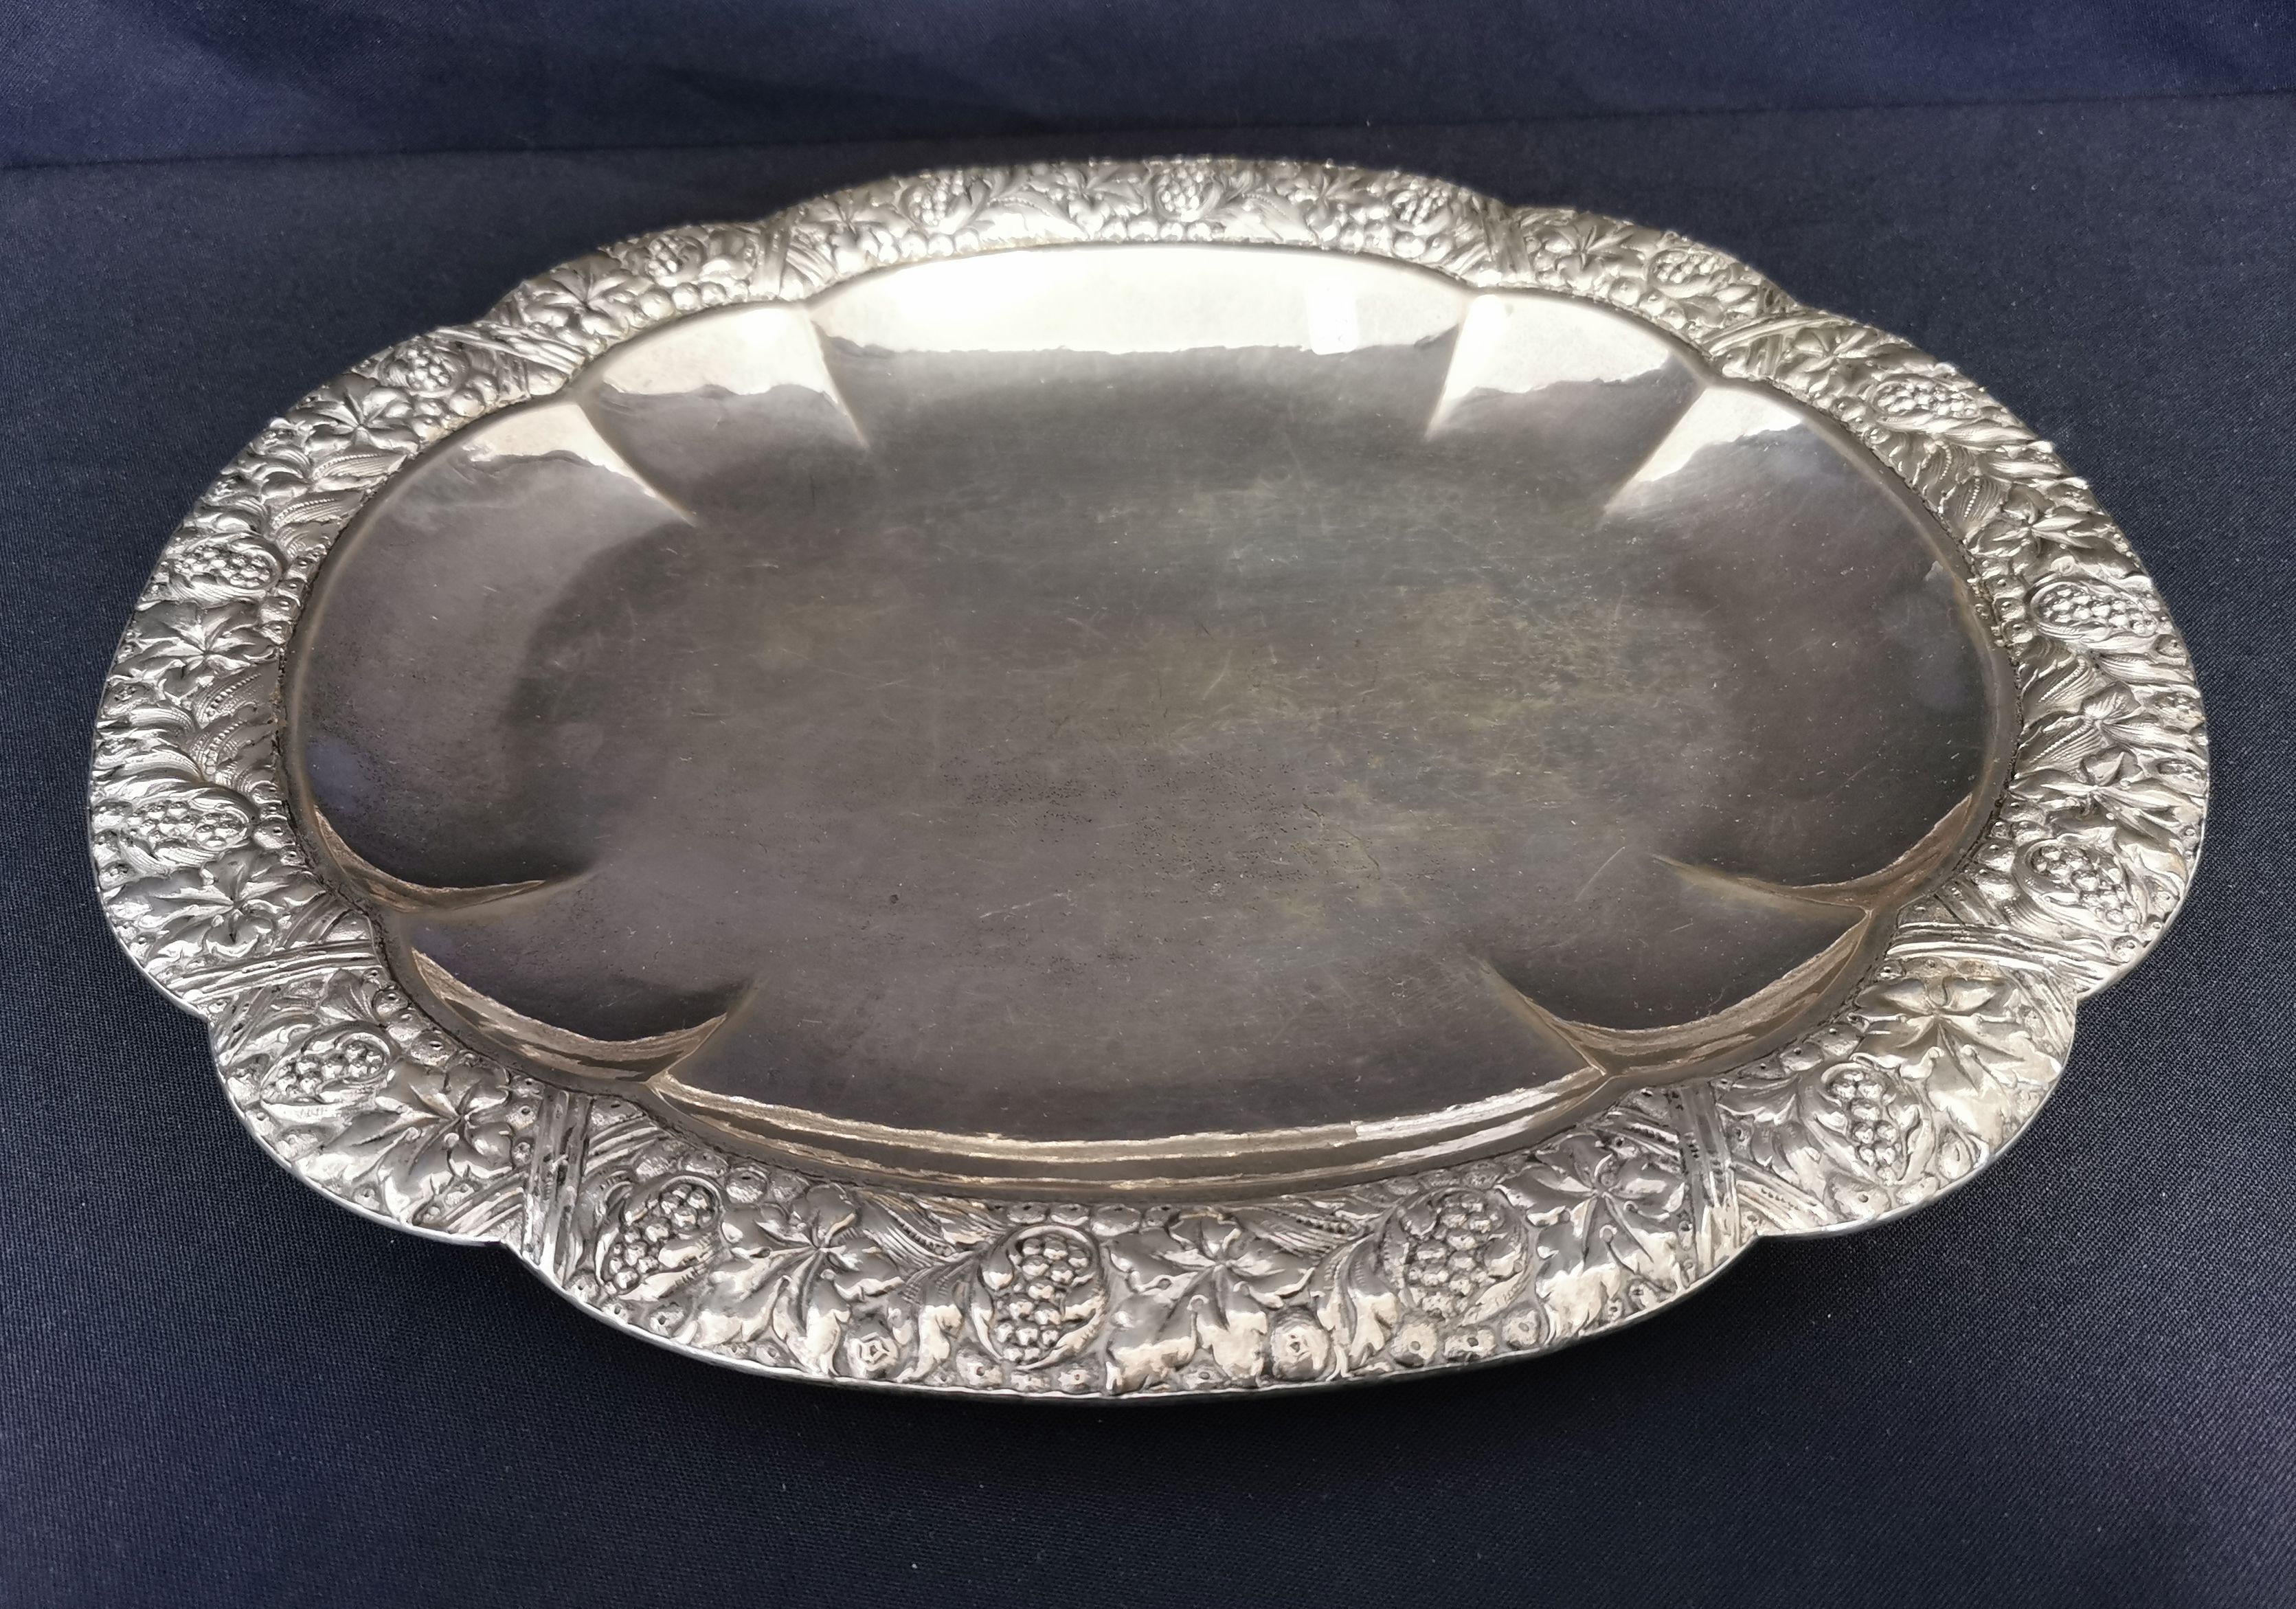 OVAL BOWL WITH RELIEF DECORATION 